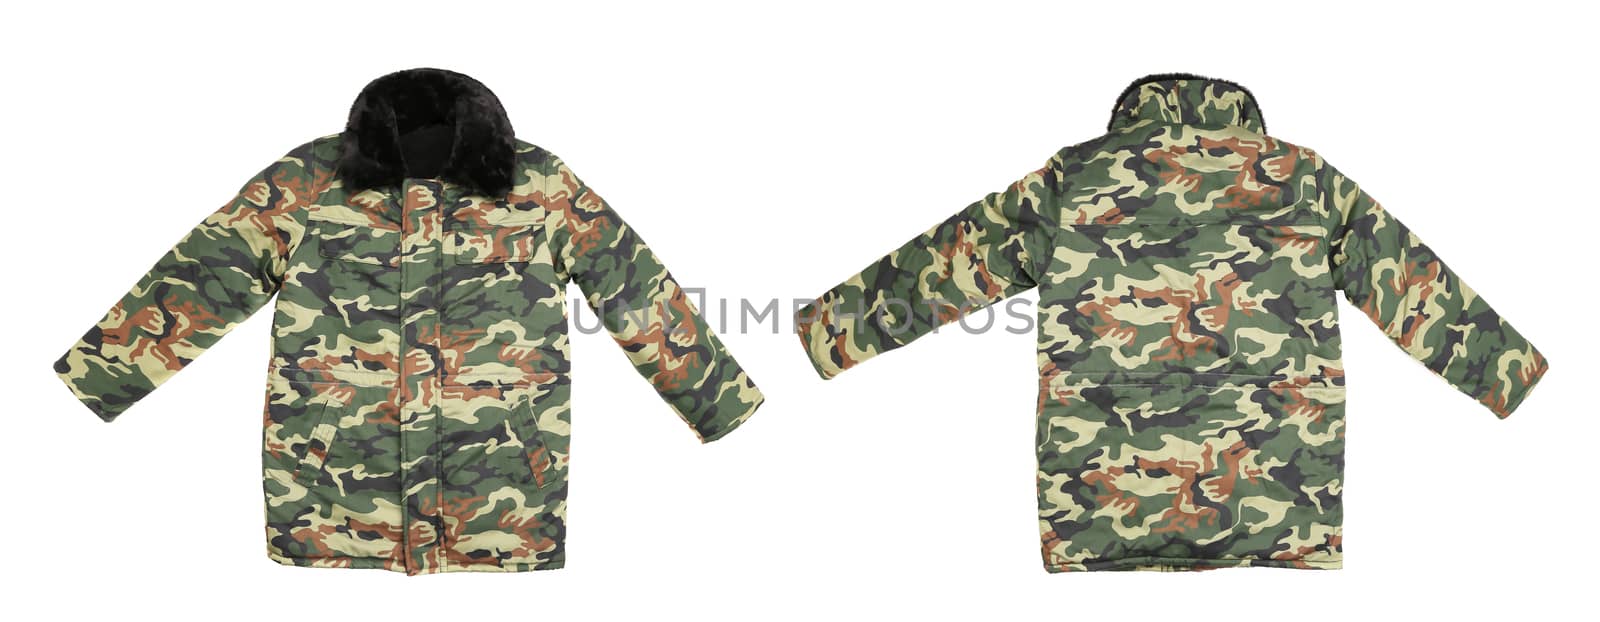 Camouflage winter jacket with black collar. Isolated on a white background.